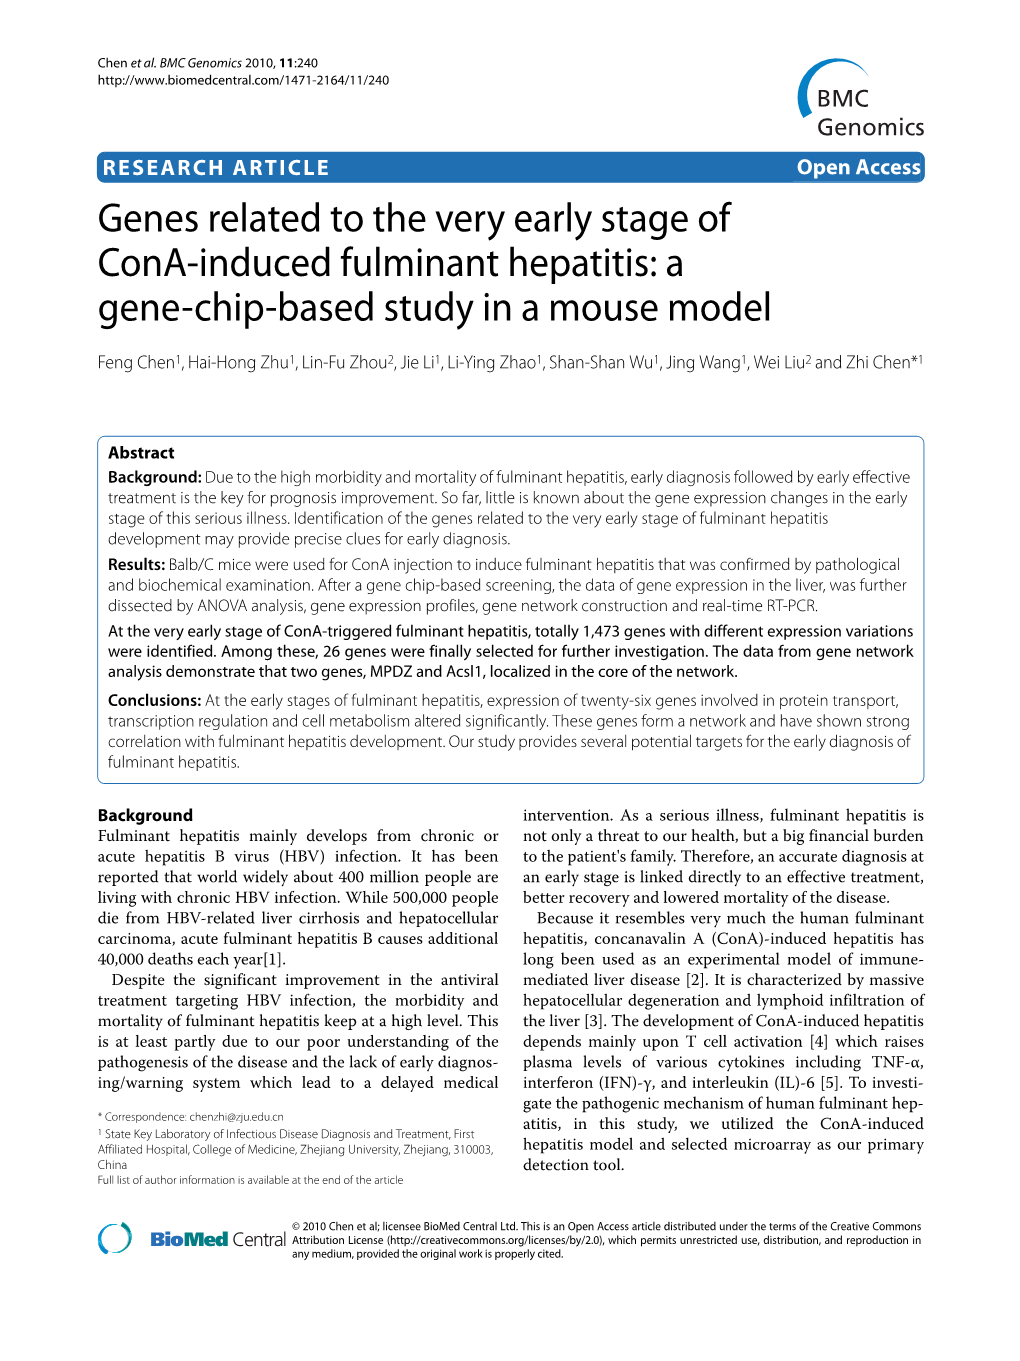 Genes Related to the Very Early Stage of Cona-Induced Fulminant Hepatitis